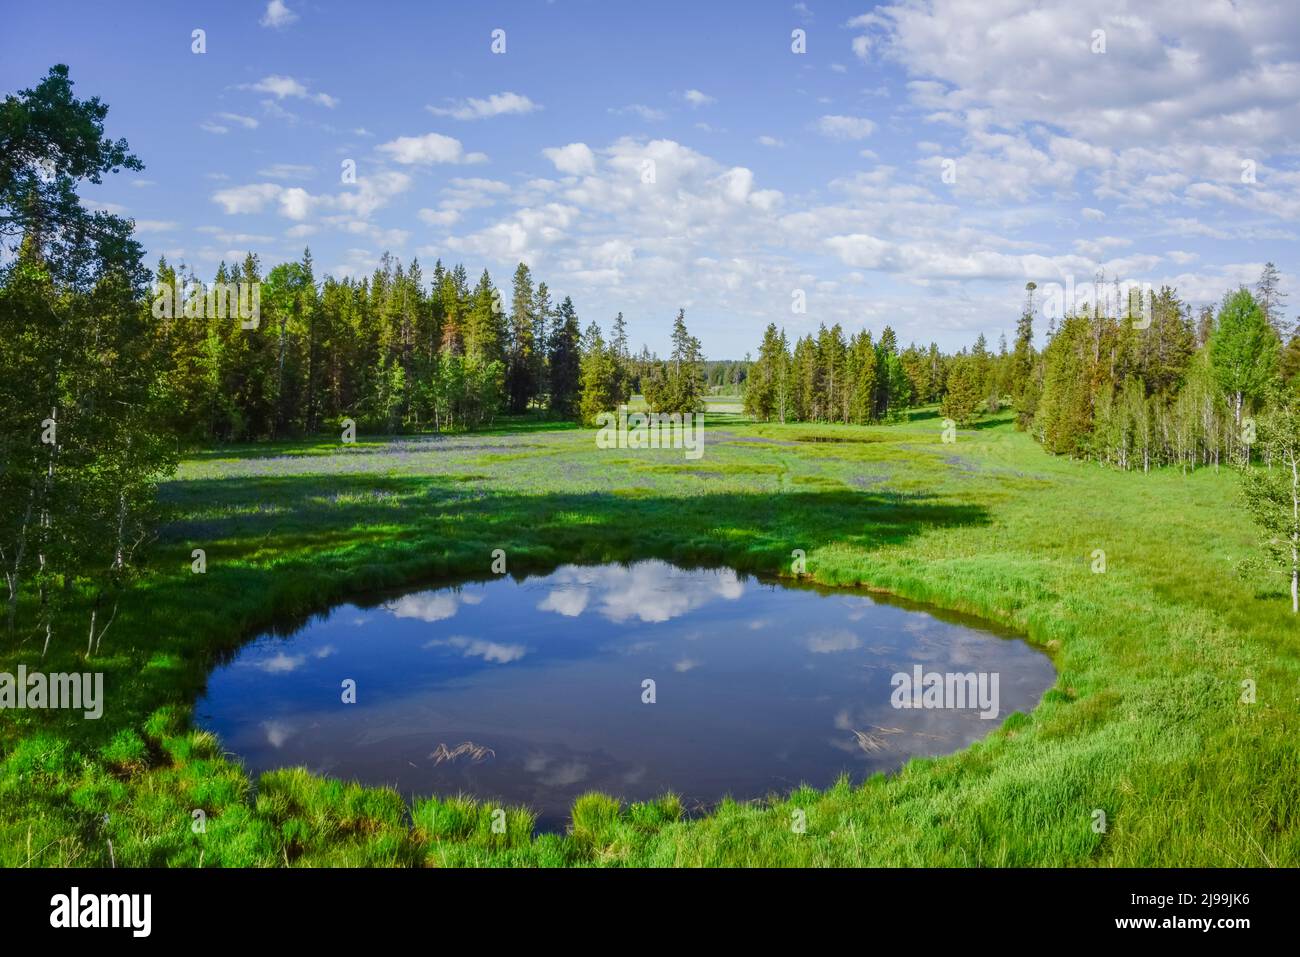 A springtime ephemeral, temporary, pond reflects clouds and sky with a feeling of contemplation. Mesa Falls Scenic Byway, Island Park, Fremont Co. USA Stock Photo